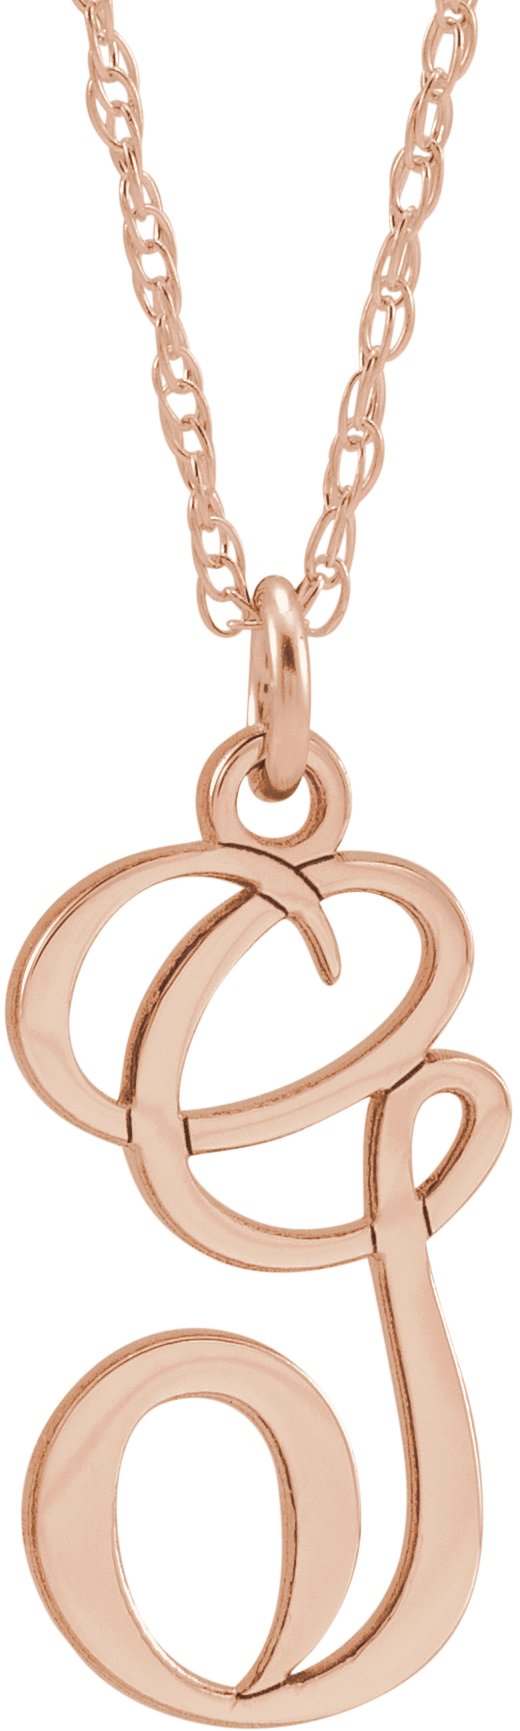 14K Rose Gold-Plated Sterling Silver Script Initial G 16-18" Necklace